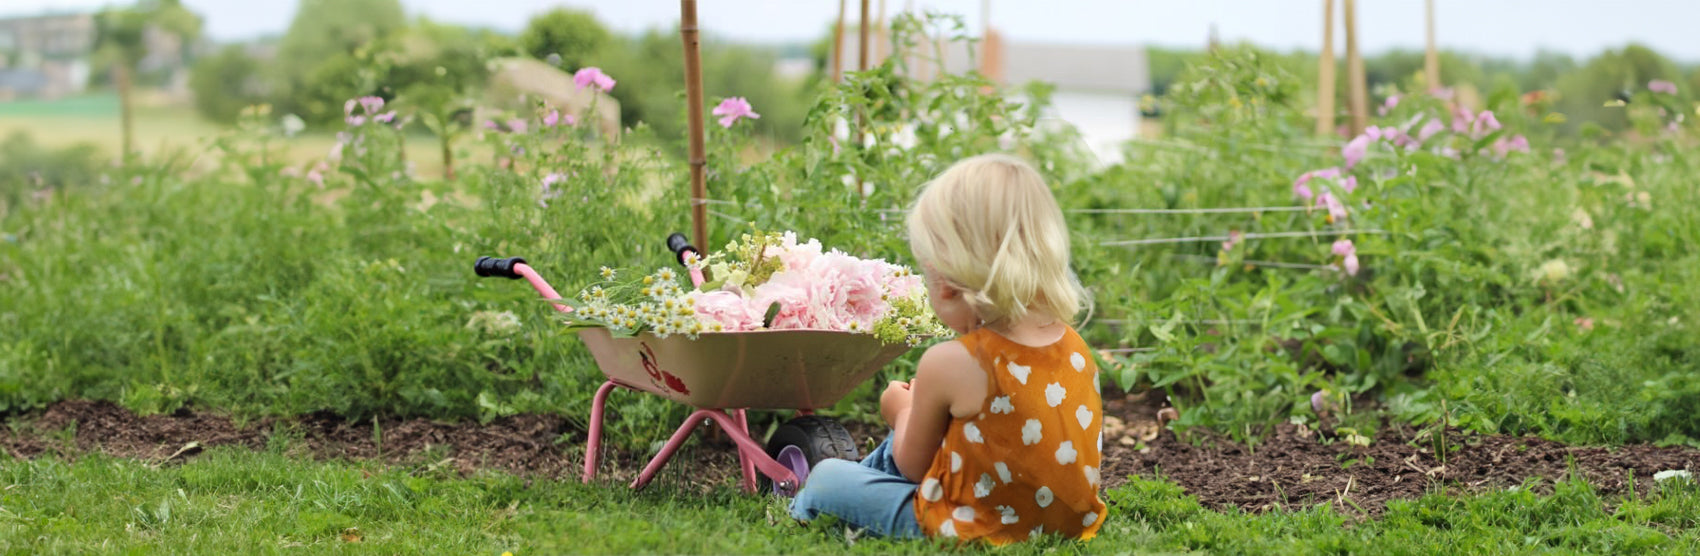 Benefits of Outdoor Play and Kids Gardening Kit, for Child Development